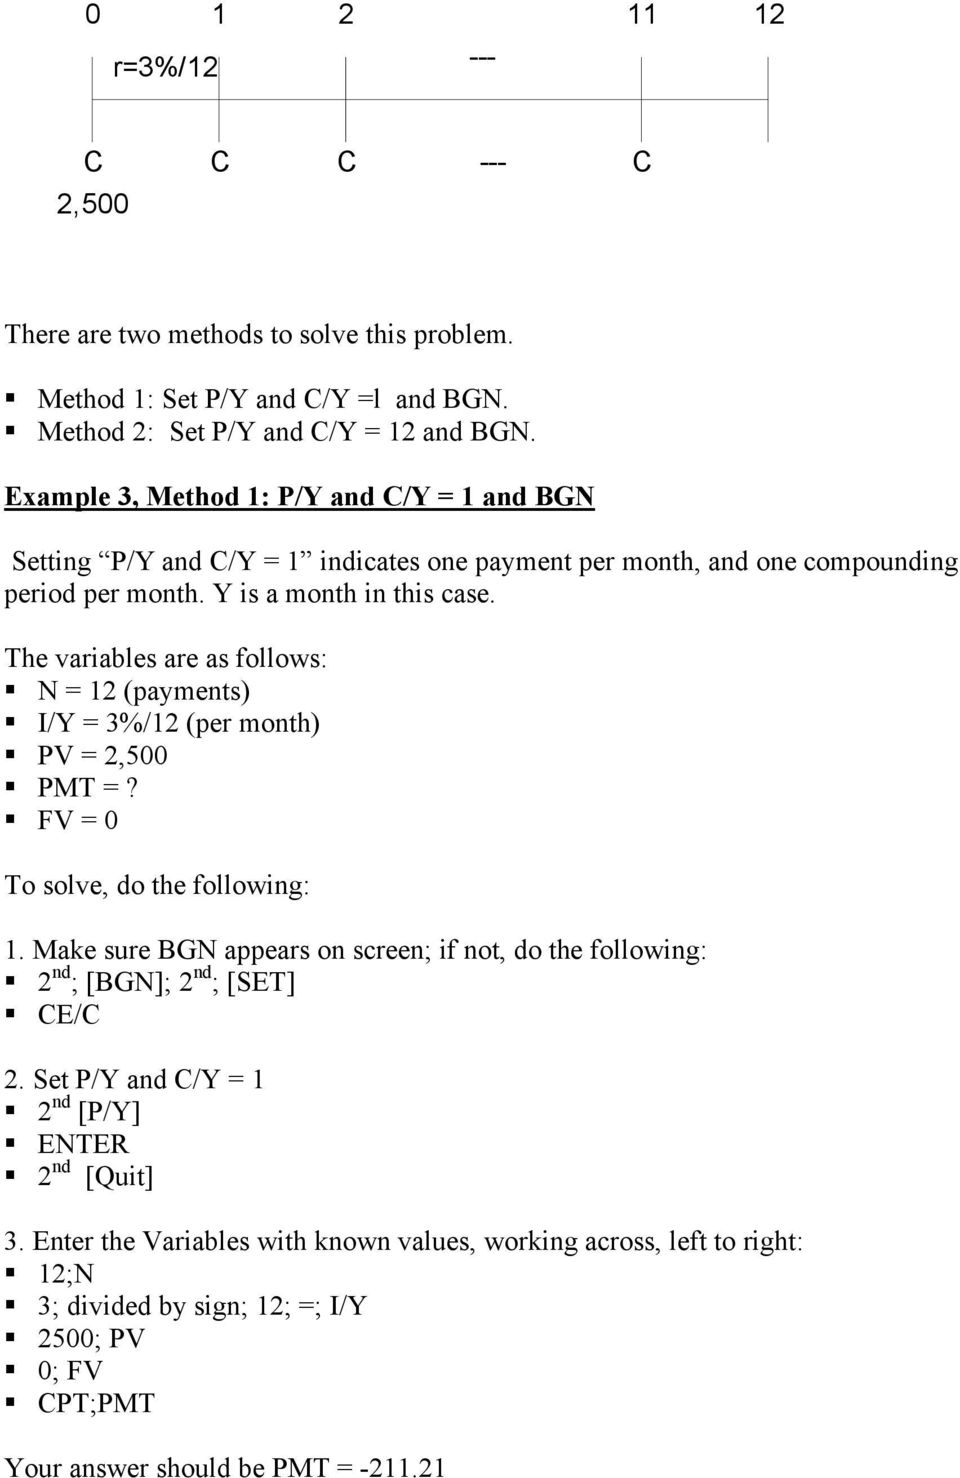 The variables are as follows: N = 12 (payments) I/Y = 3%/12 (per month) PV = 2,500 PMT =? FV = 0 To solve, do the following: 1.